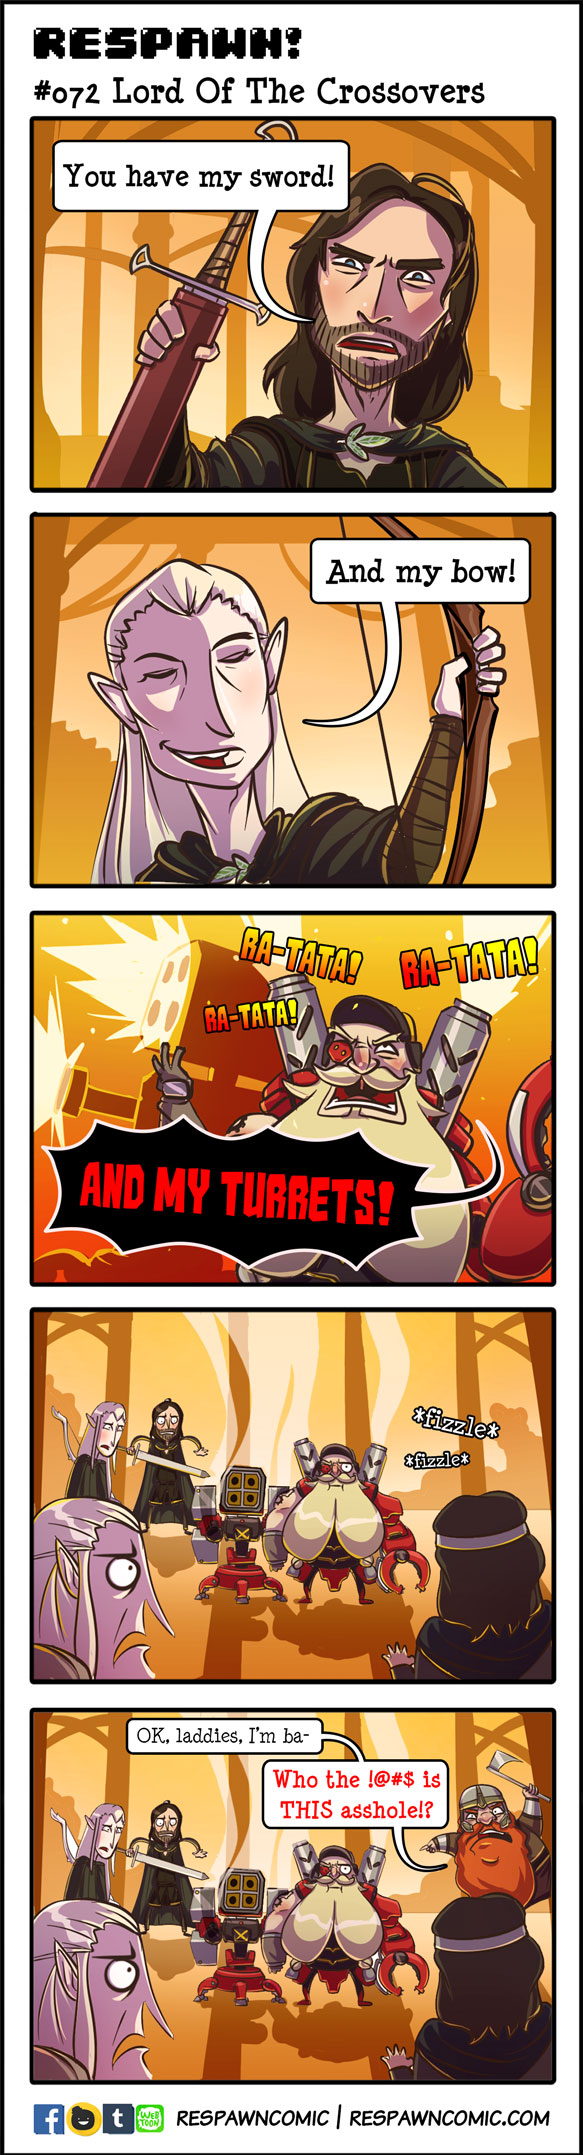 lotr torbjorn - Respawn! Lord Of The Crossovers You have my sword! And my bow! Batatao Gastatas RaTata! And My Turrets! fizzle &fizzle Ok, laddies, I'm ba Who the !@#$ is This asshole!? fot Respawncomic | Respawncomic.Com